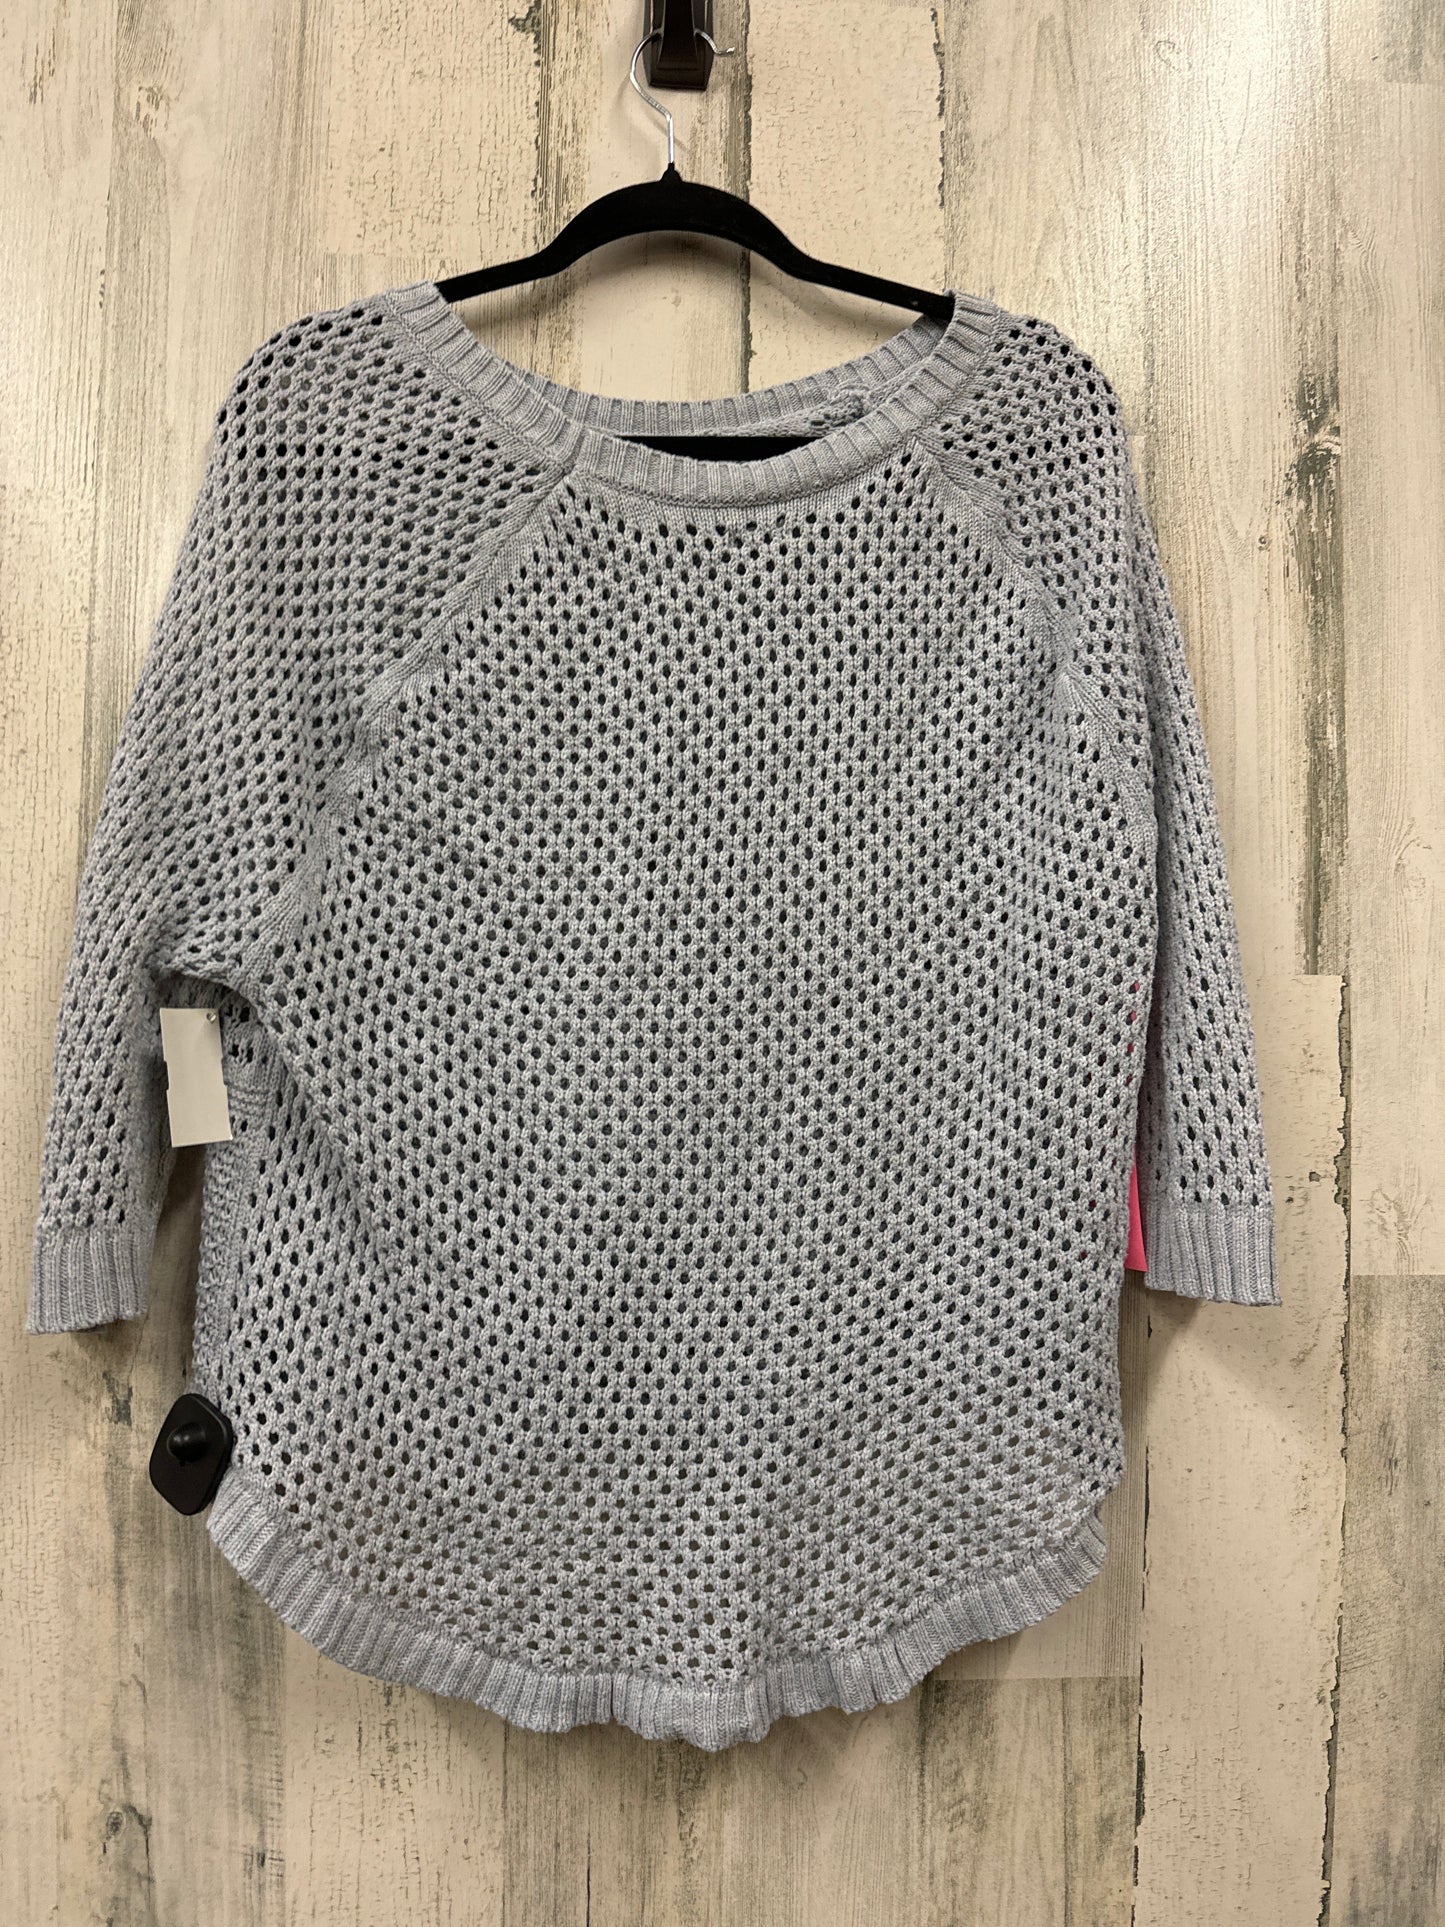 Grey Top Short Sleeve Aerie, Size Xs